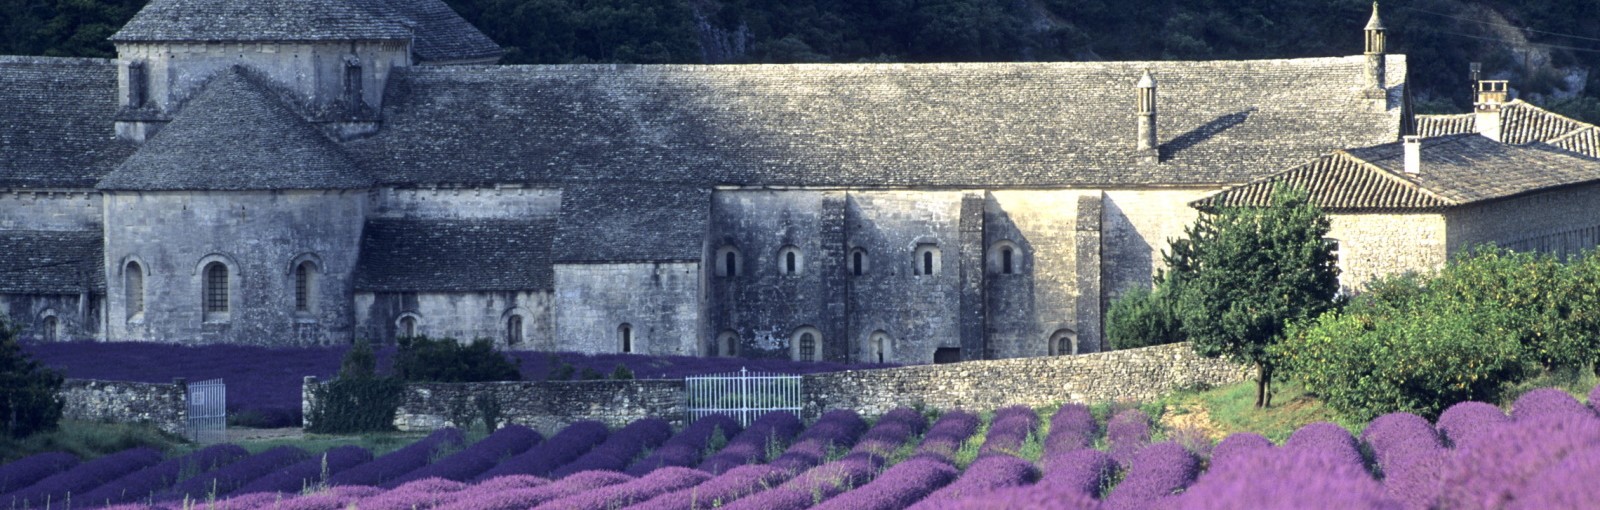 Tours Two days in Provence - Multi-regional - Multiday tours from Paris